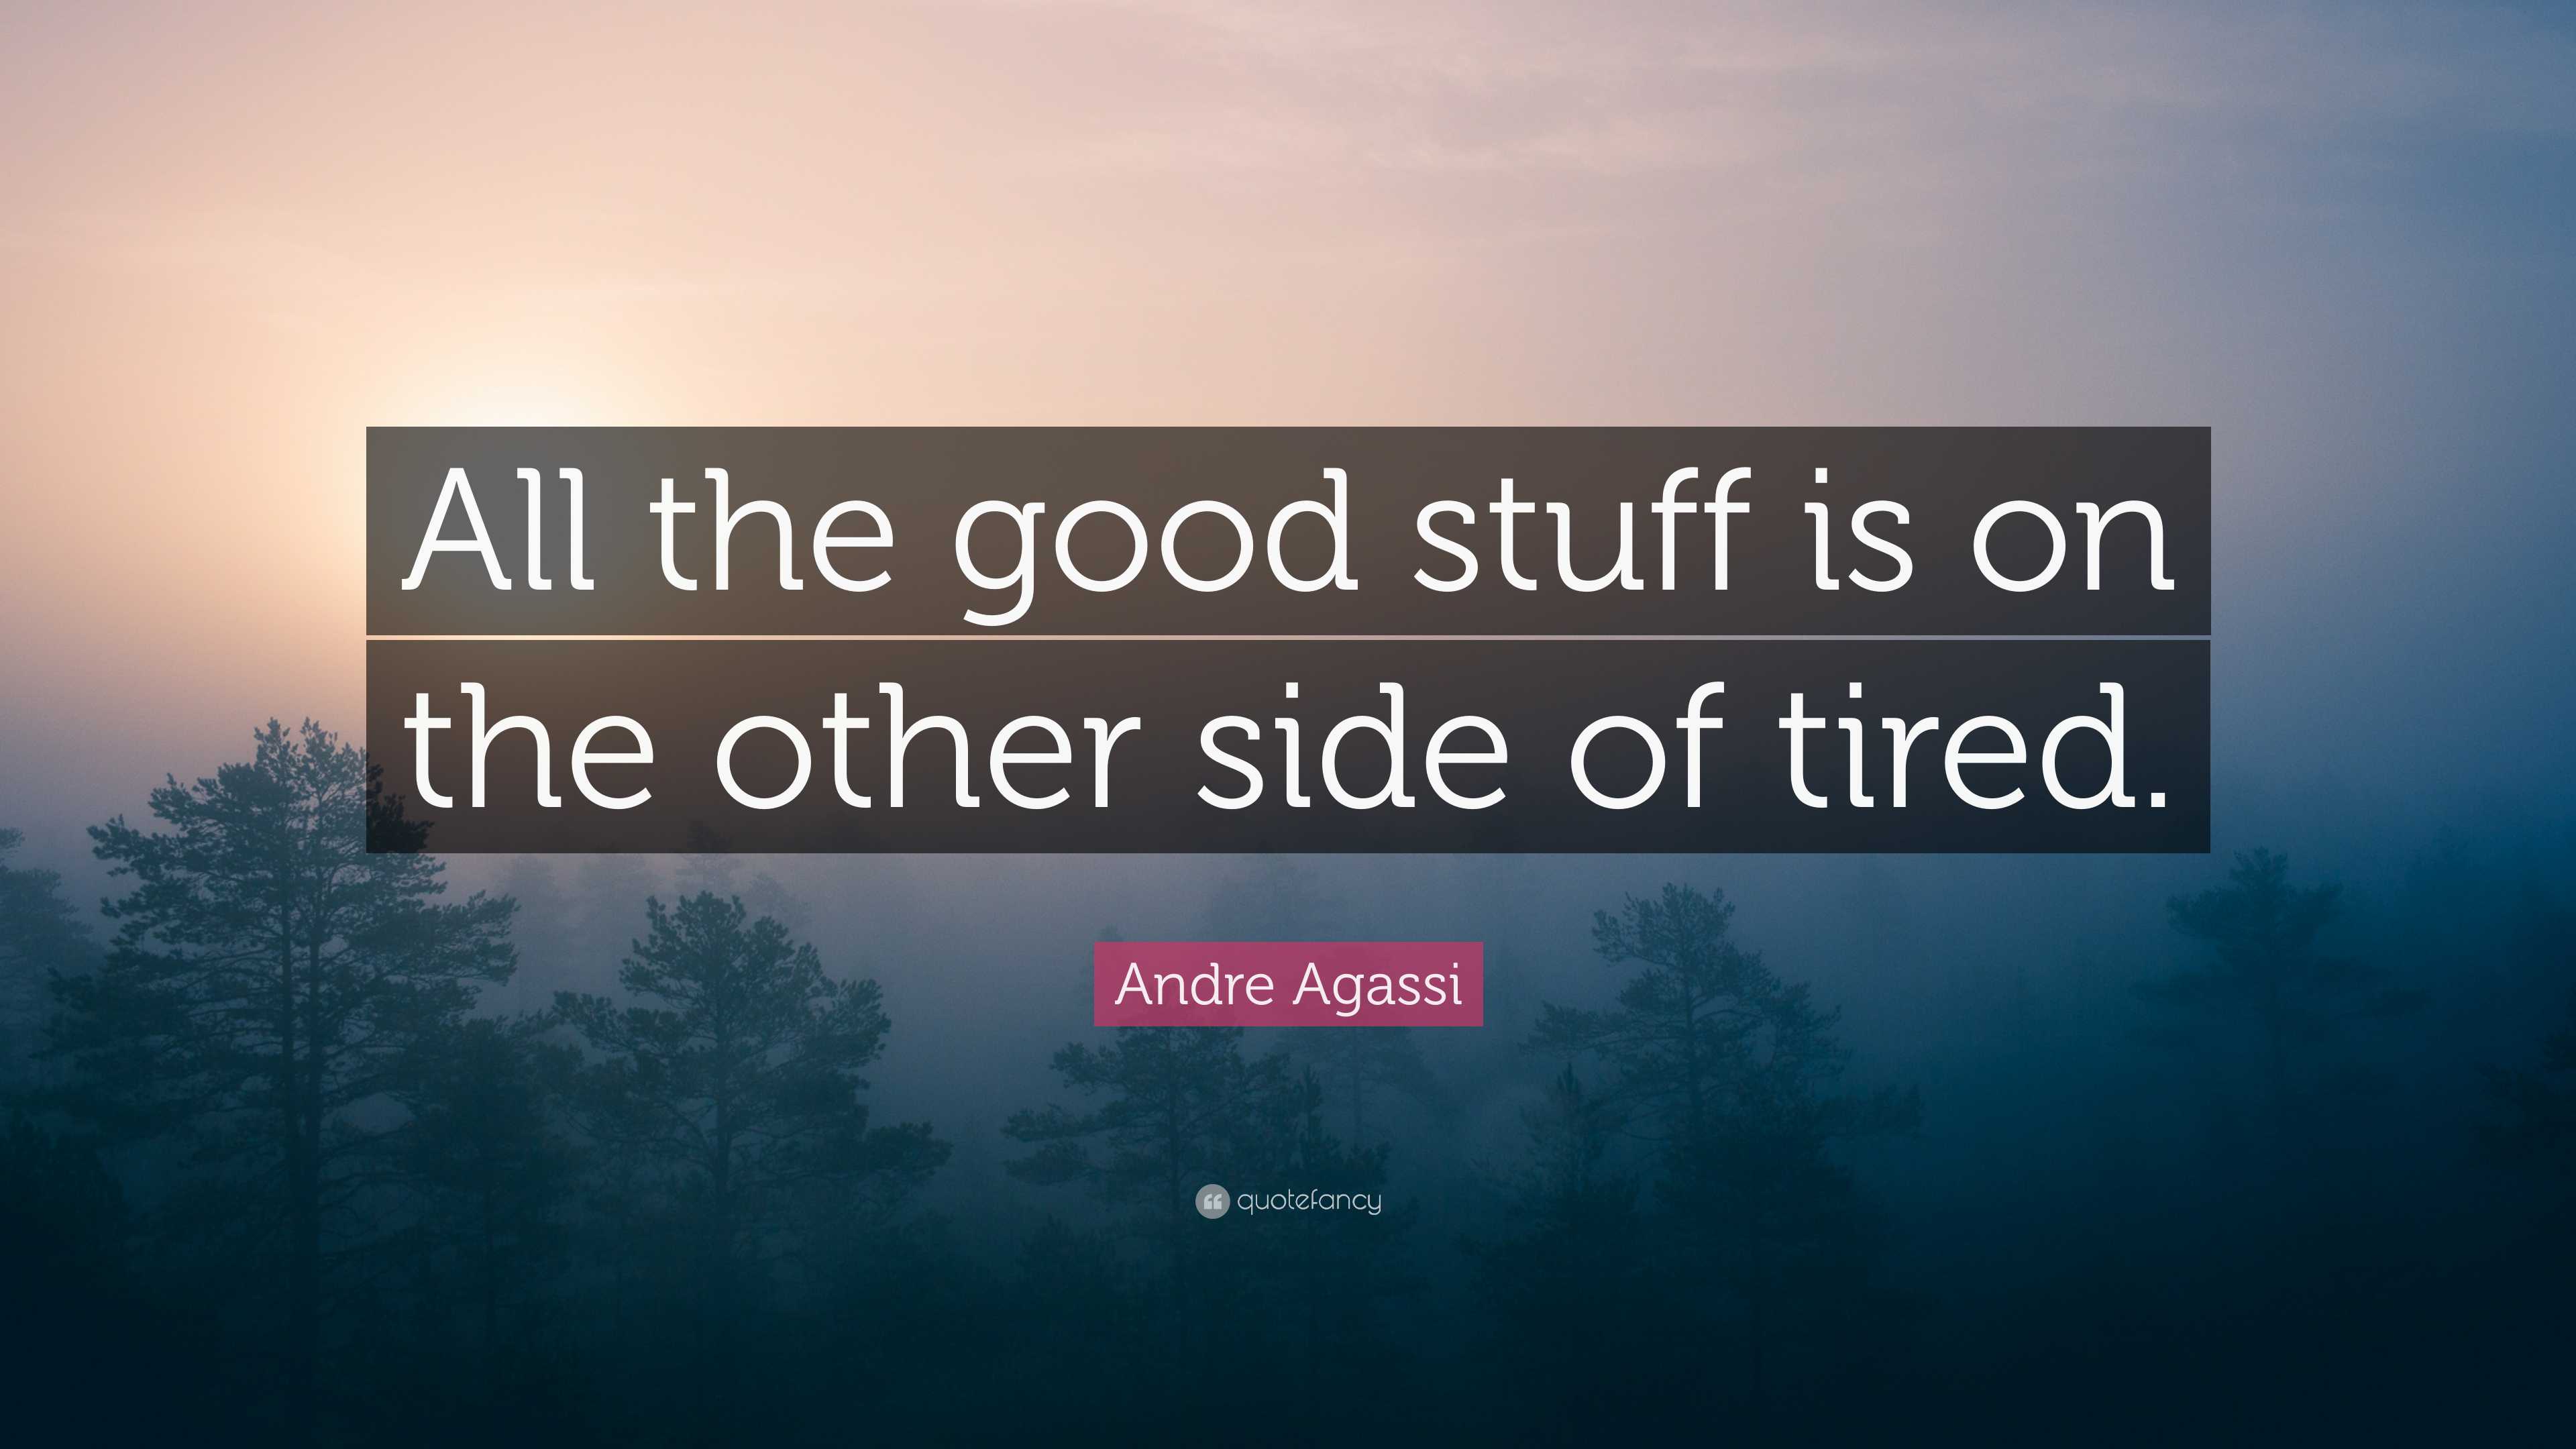 https://quotefancy.com/media/wallpaper/3840x2160/7976558-Andre-Agassi-Quote-All-the-good-stuff-is-on-the-other-side-of.jpg